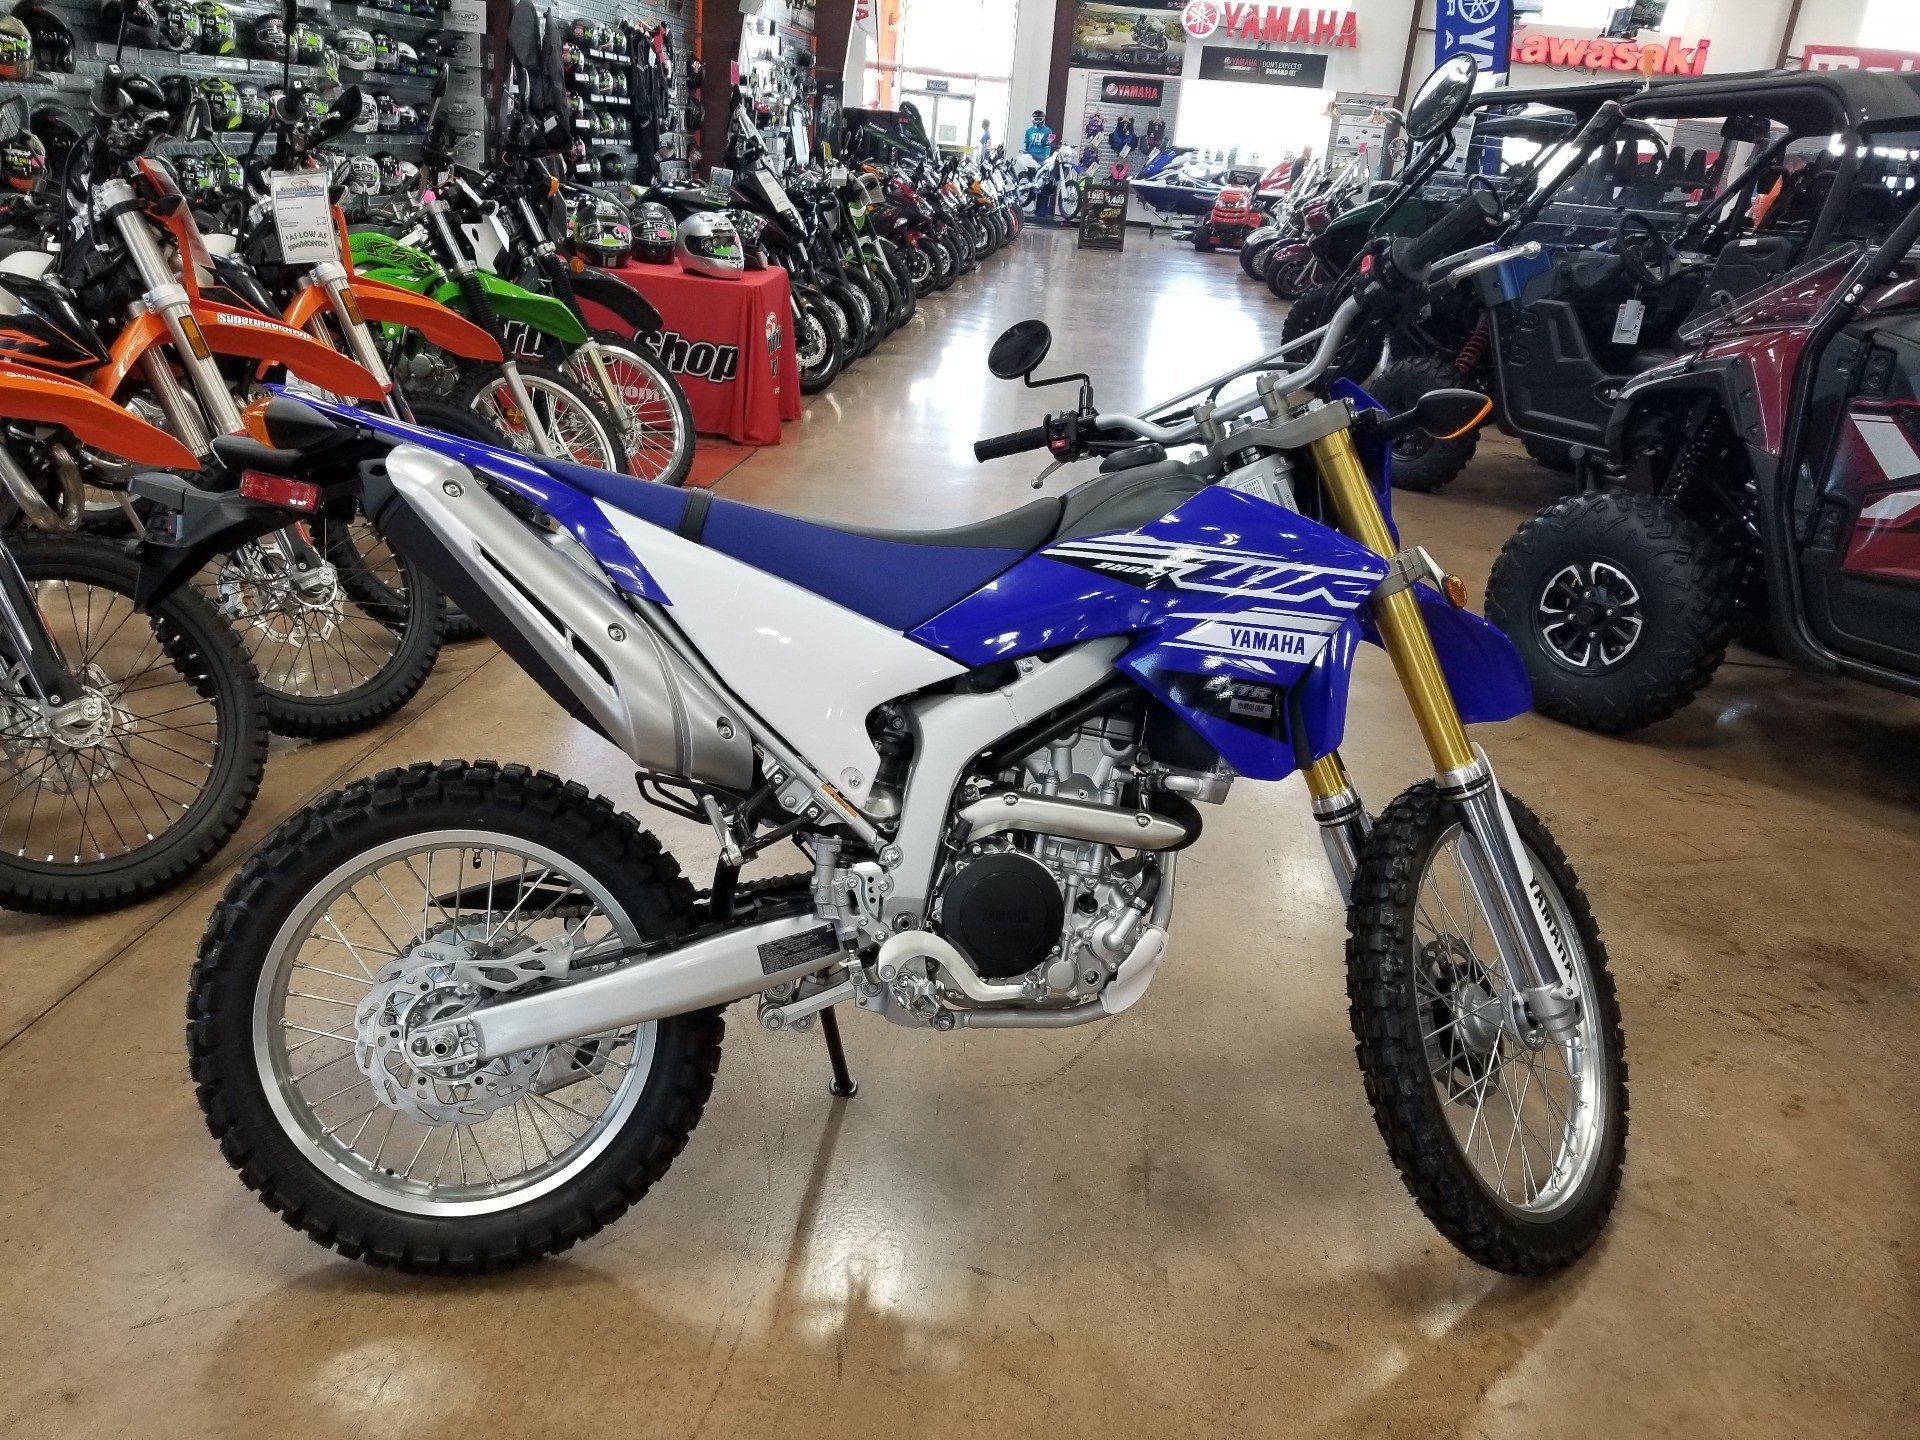 New 2019 Yamaha WR250R Motorcycles in Evansville, IN | Stock Number